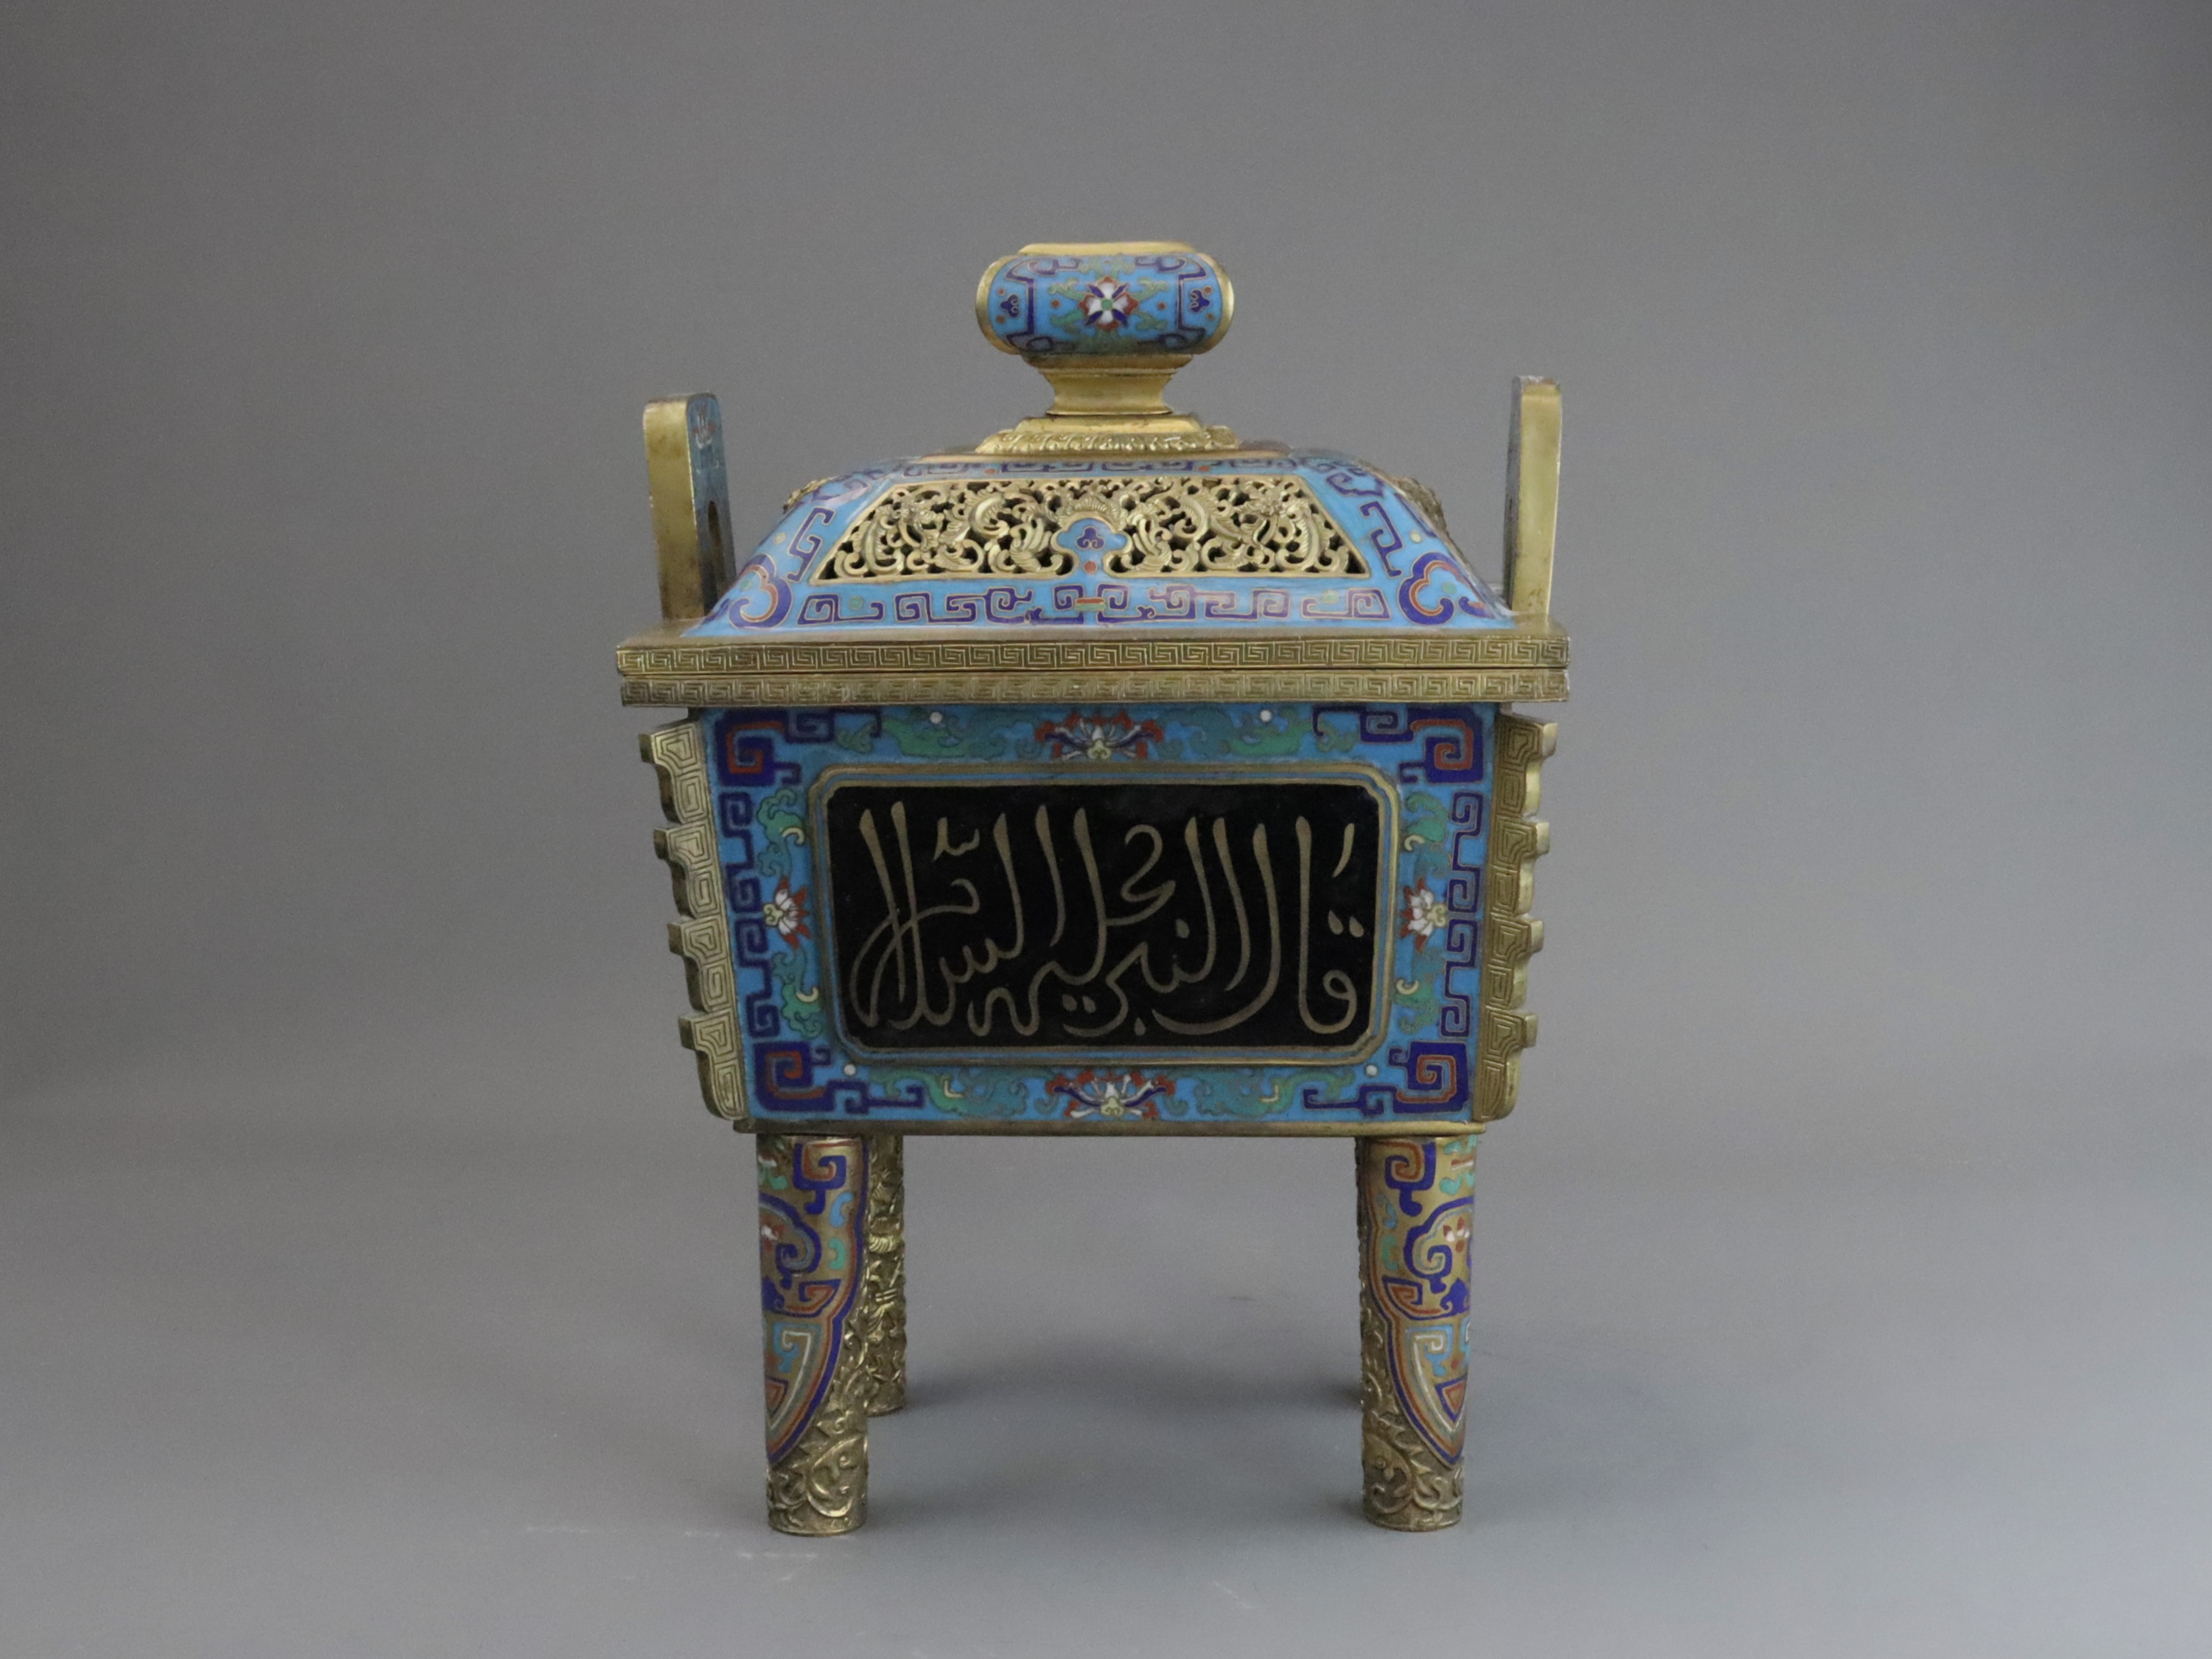 An Arabic Inscribed Cloisonne Censer and Cover, fang ding, late Qing dynasty - Image 4 of 9